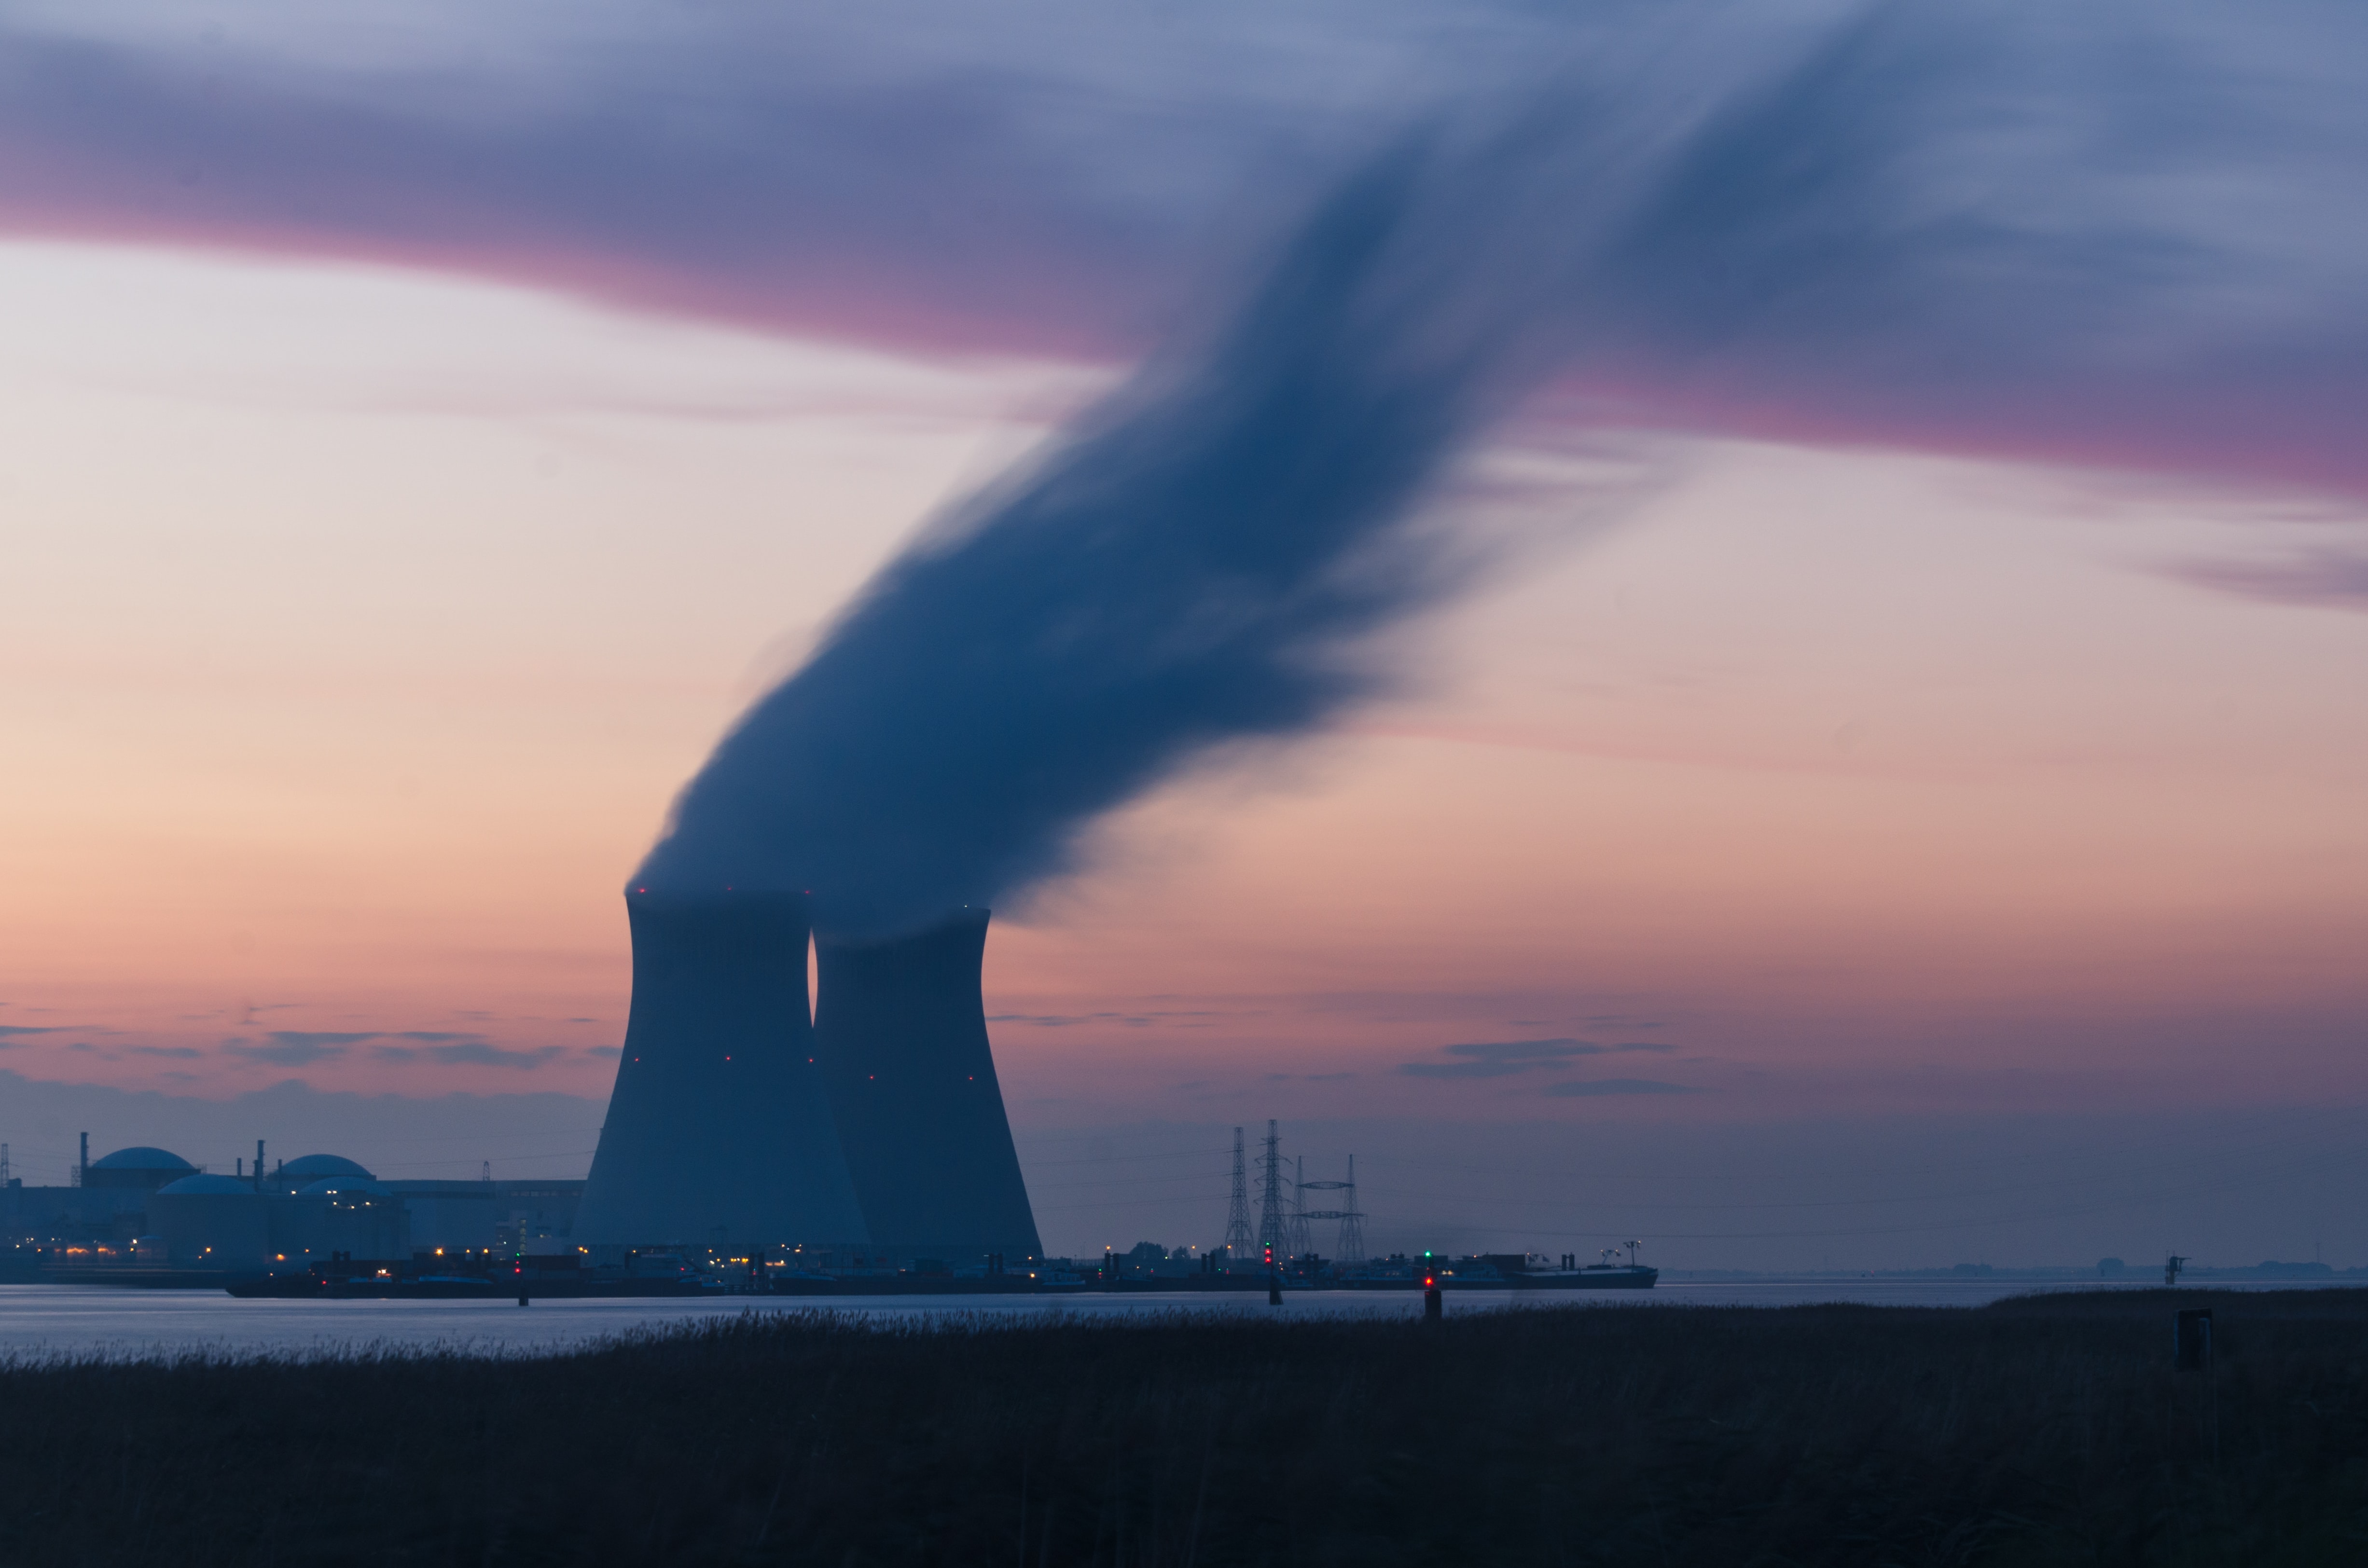 UAE: Unit 2 Operating License Has Been Obtained By Barakah Nuclear Power Plant